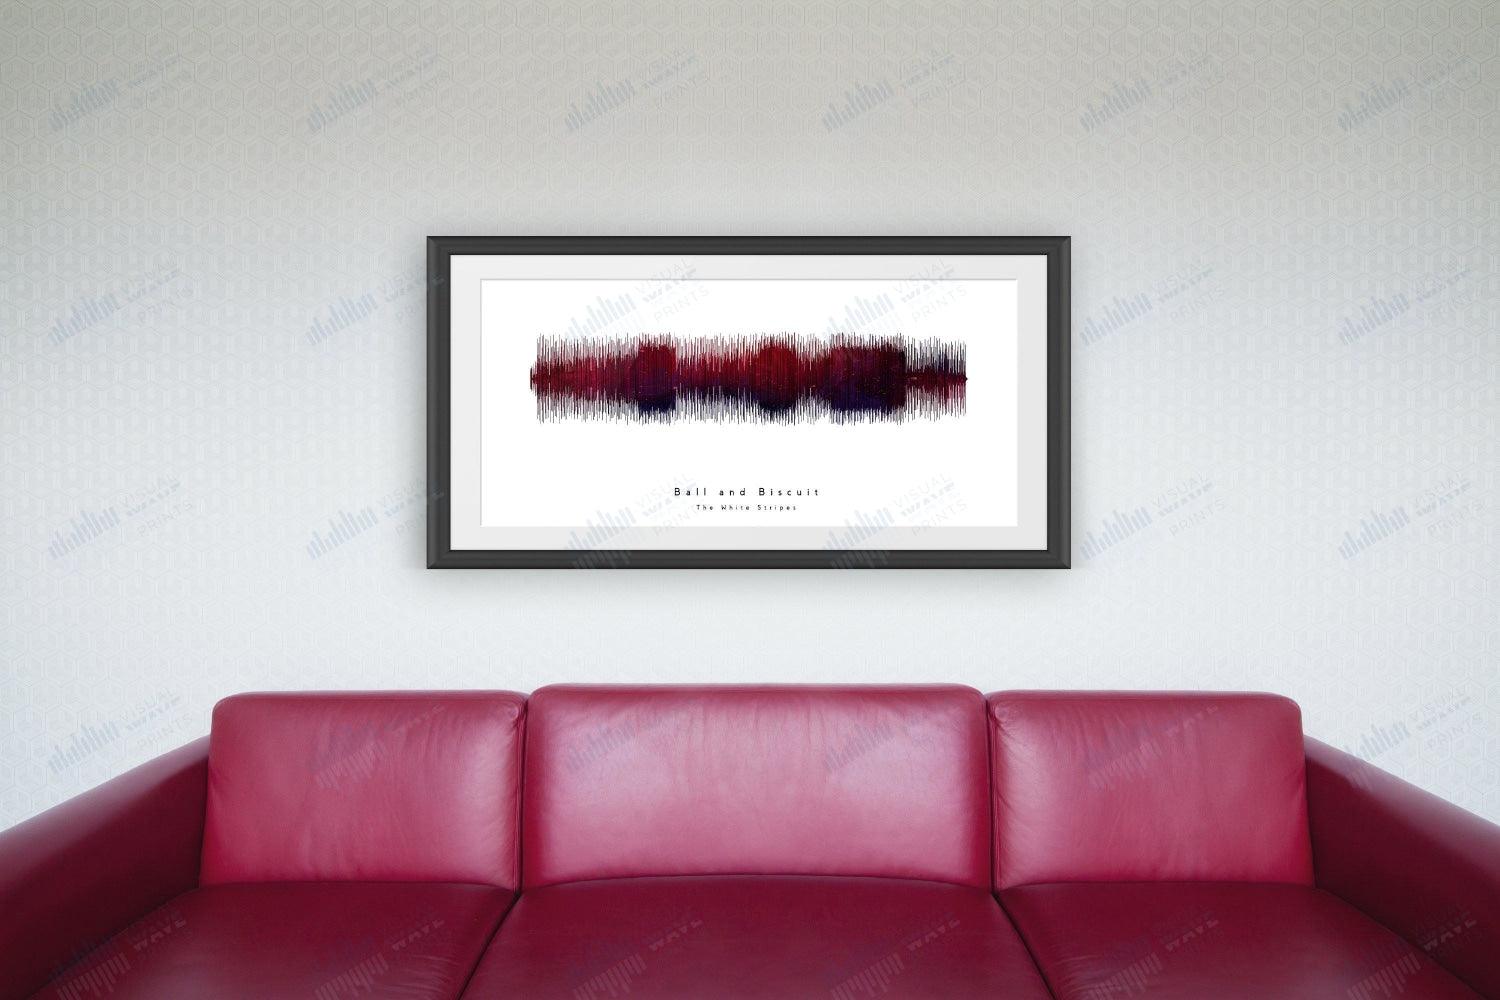 Ball and Biscuit by The White Stripes - Visual Wave Prints